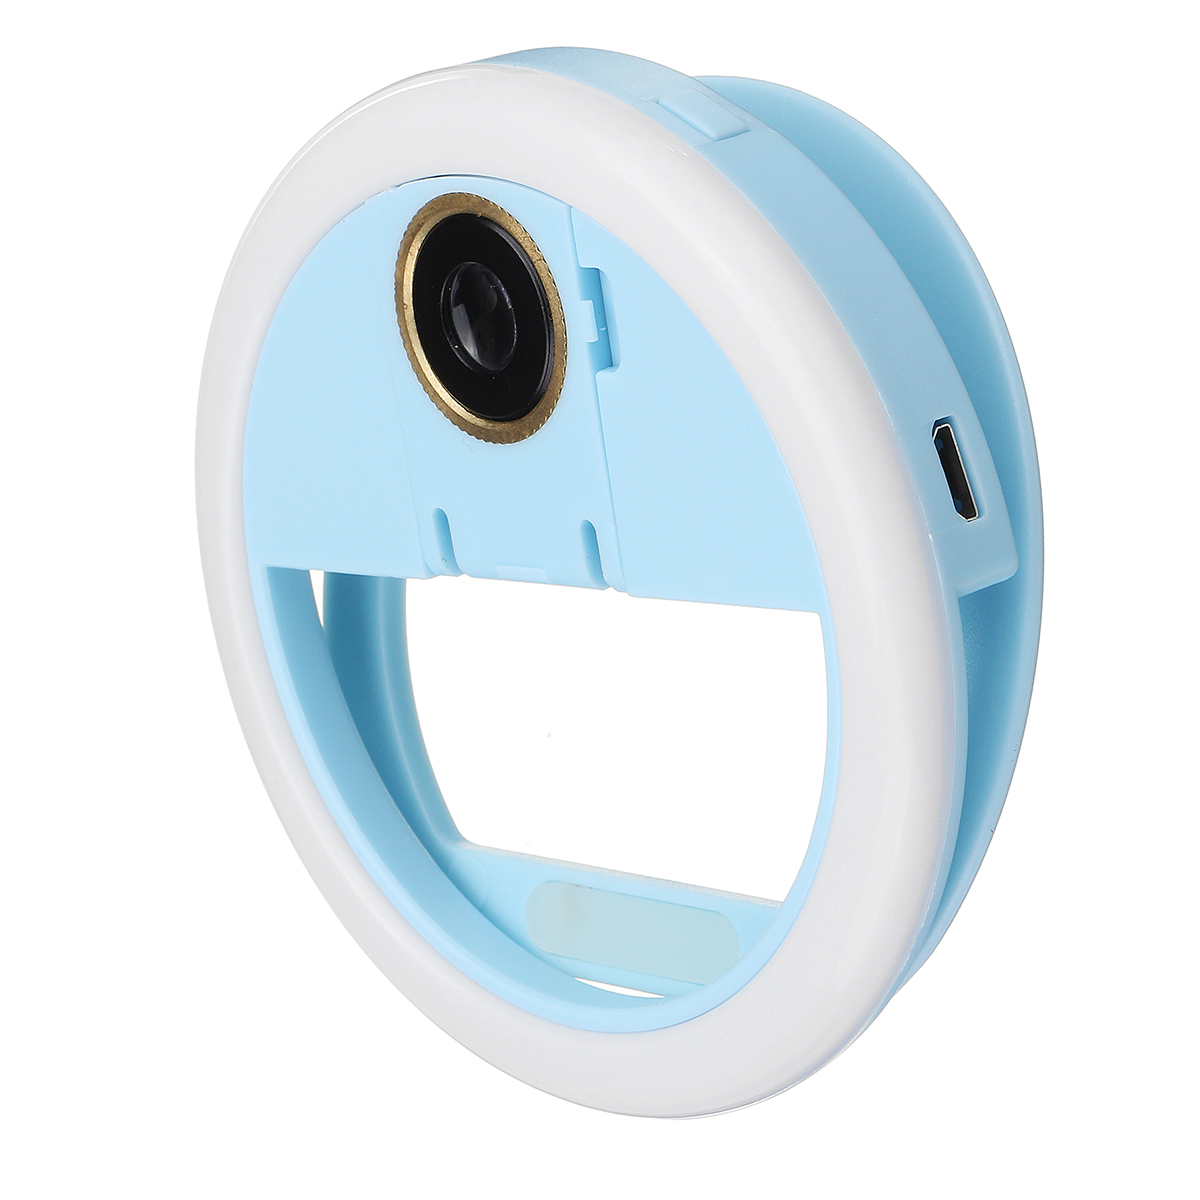 Universal-Selfie-LED-Ring-Flash-063x-Wide-Angle-Macro-Phone-External-Lens-Camera-for-Cell-Phone-1633420-9